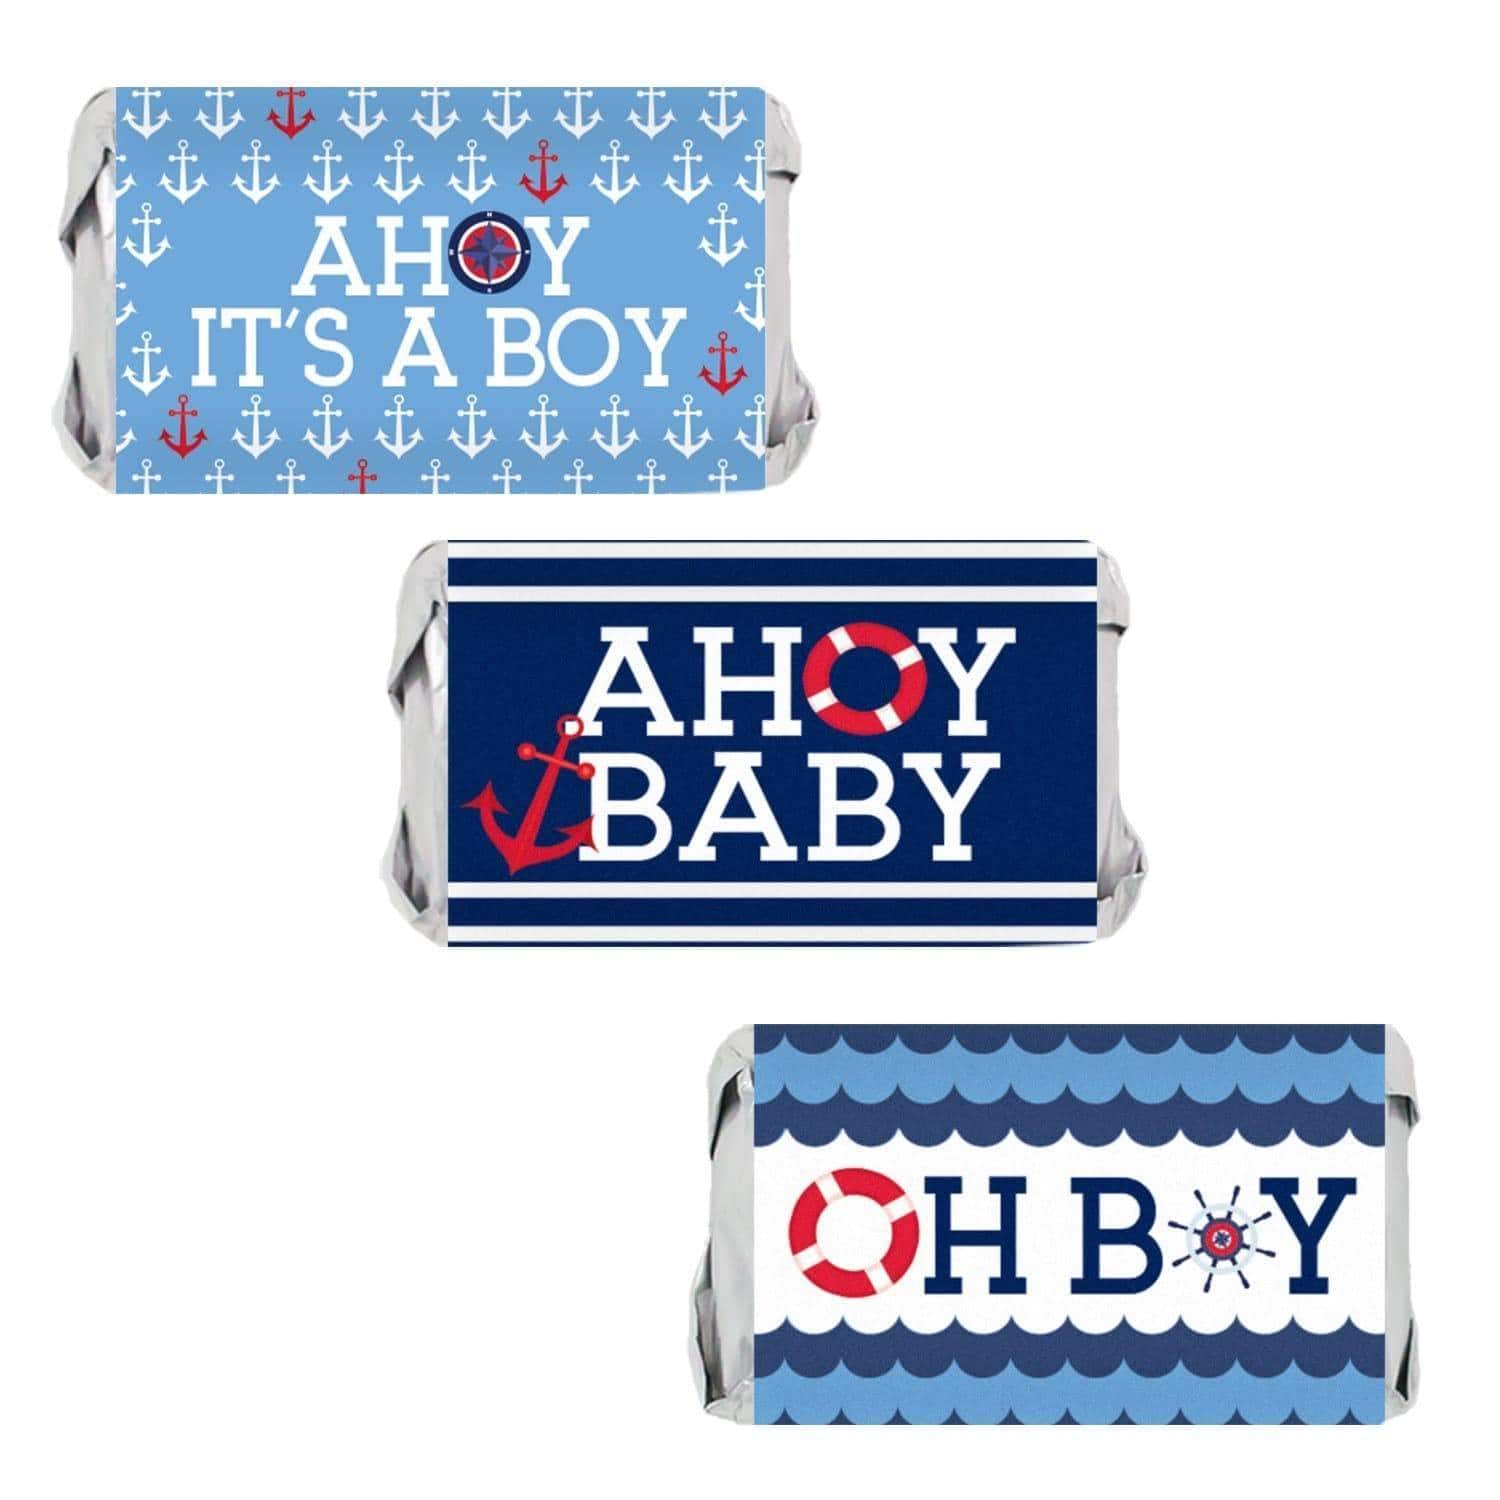 Ahoy It’s a Boy Baby Shower Mini Candy Bar Stickers - 45 Count